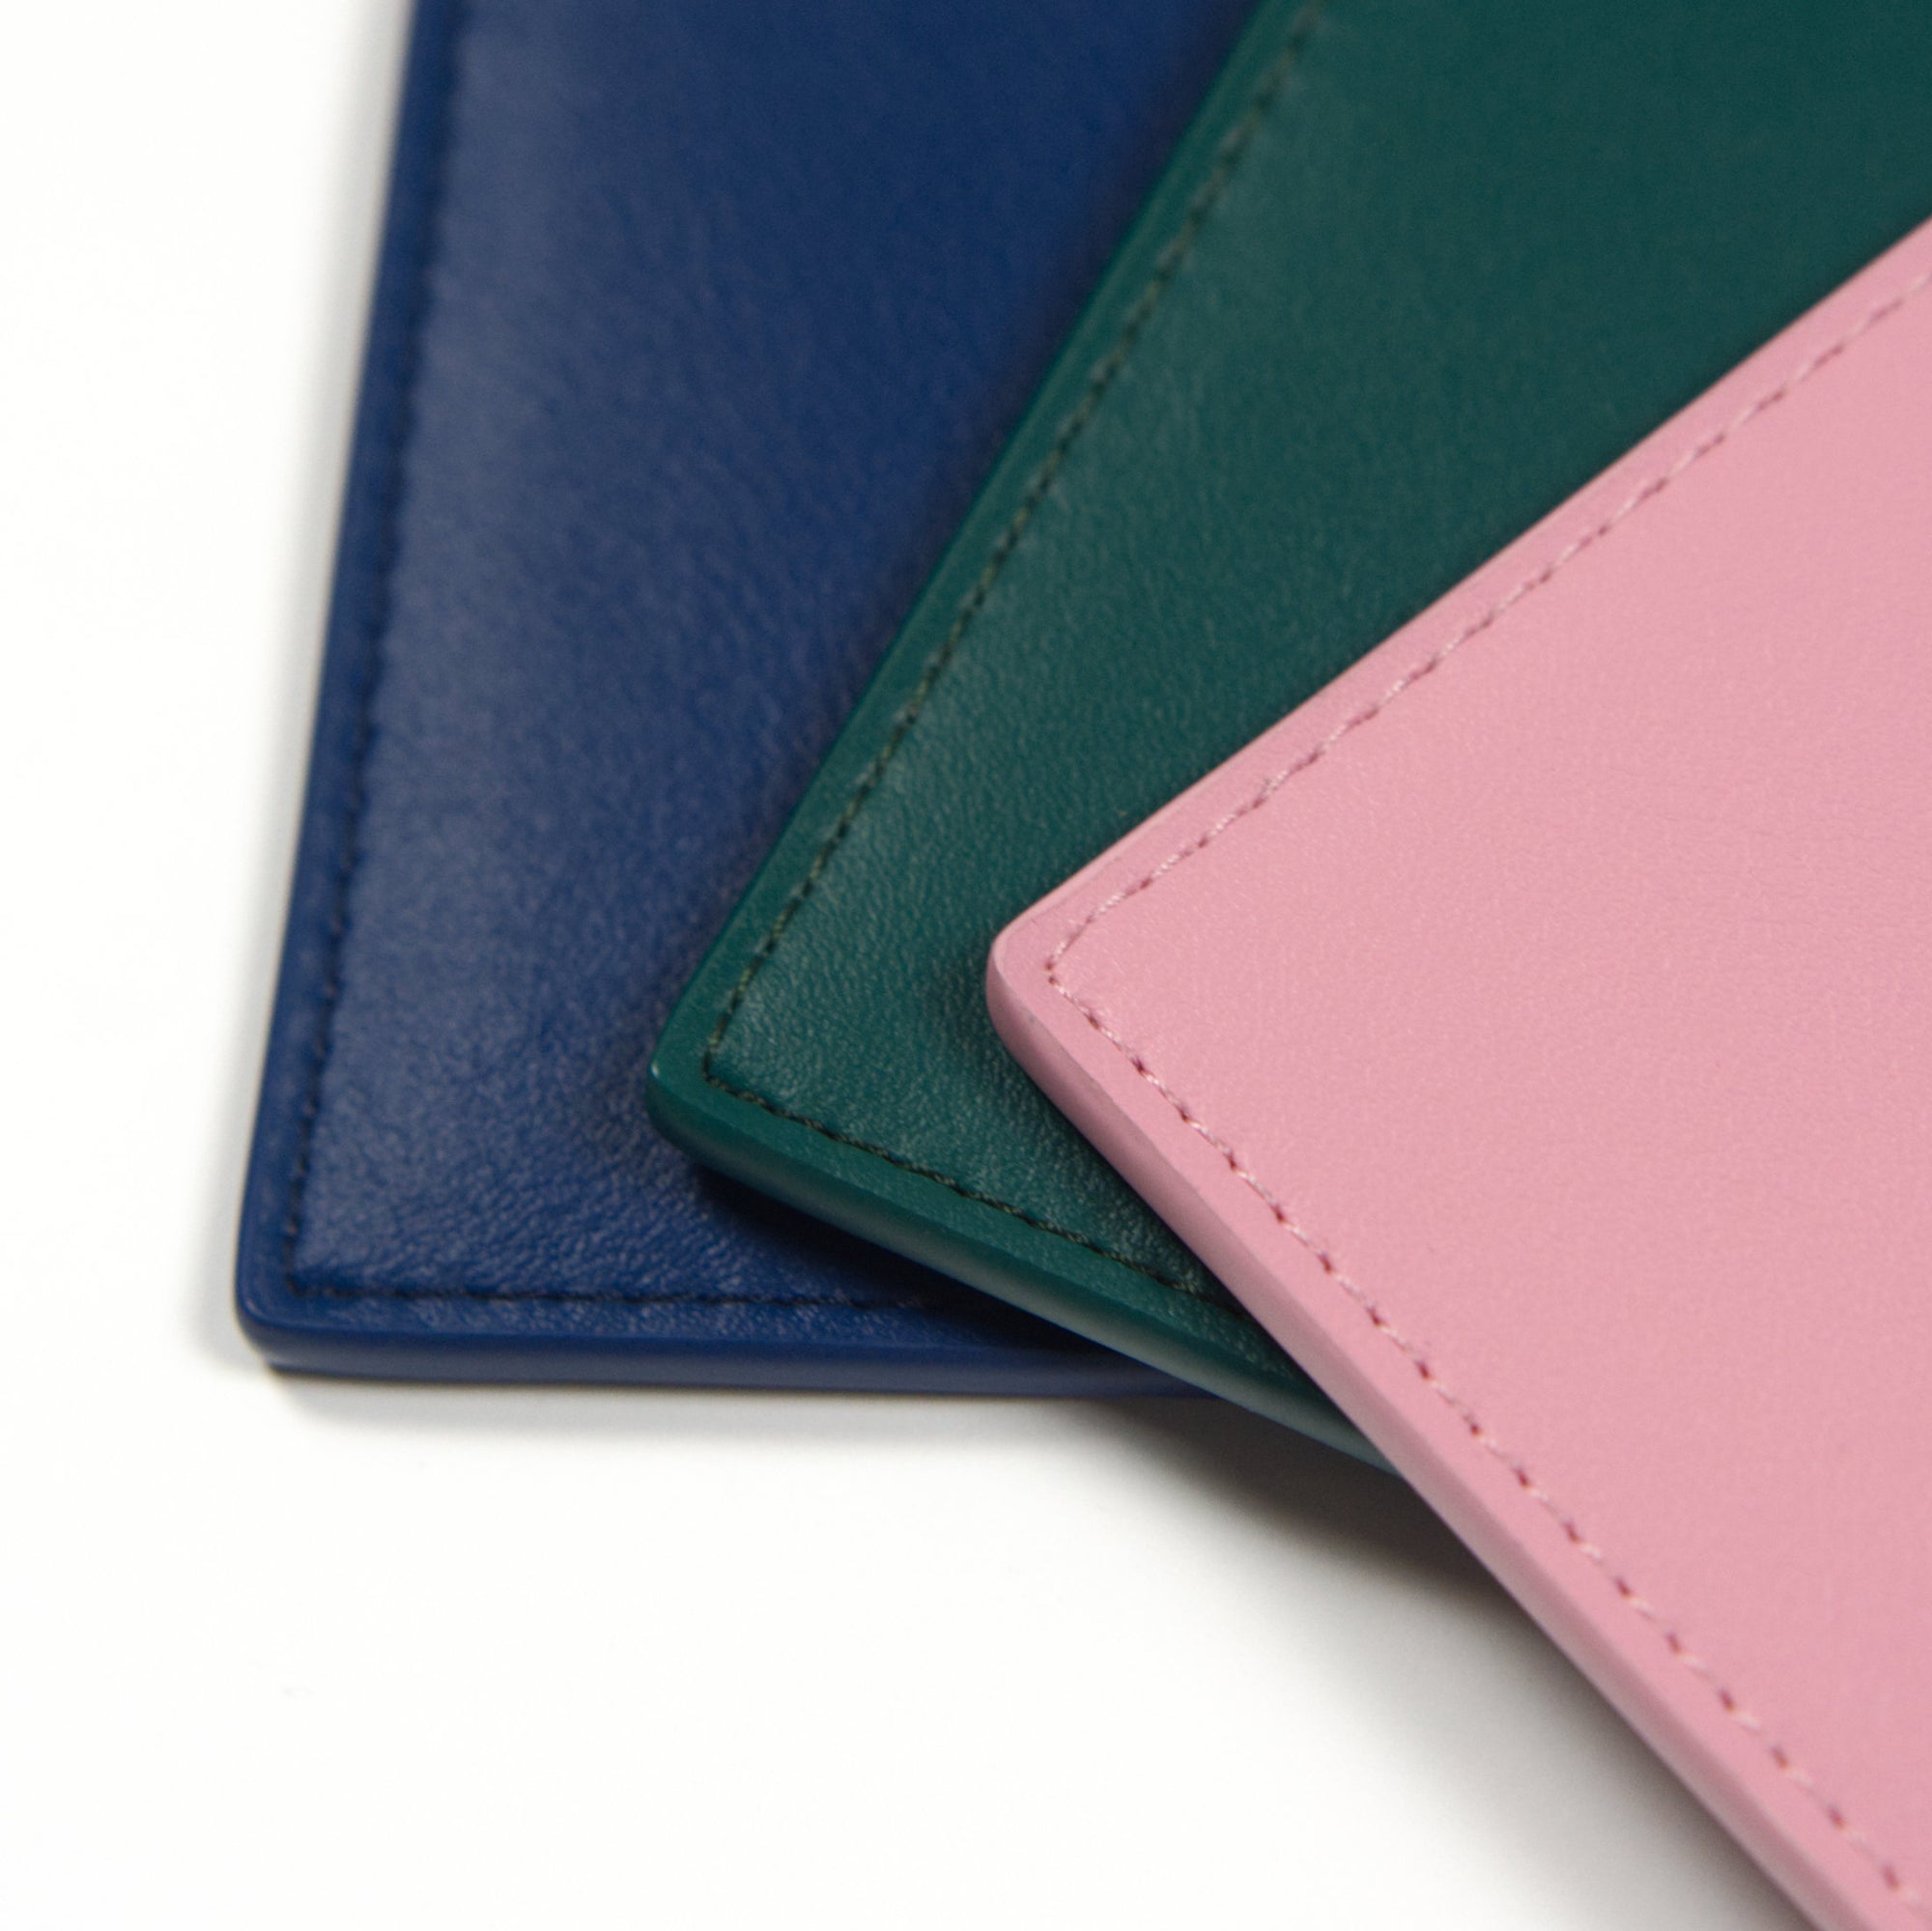 GLG - colored pocket protectors for lab coats and white coats